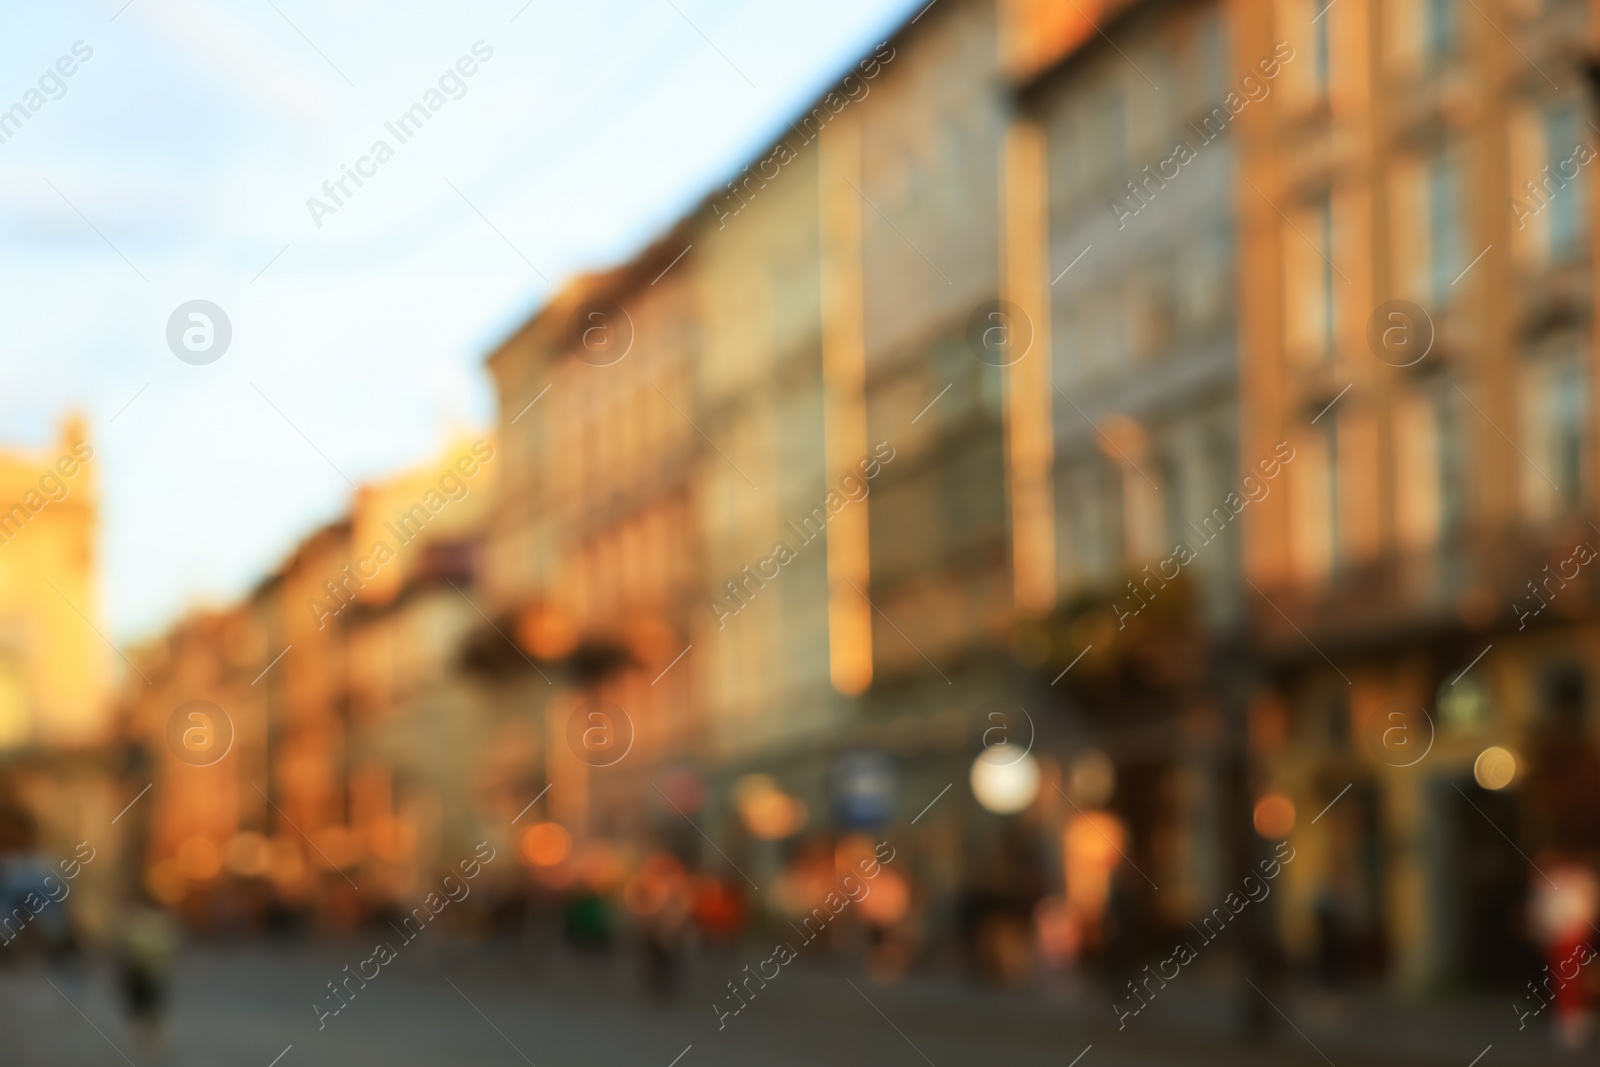 Photo of Blurred view of buildings on city street